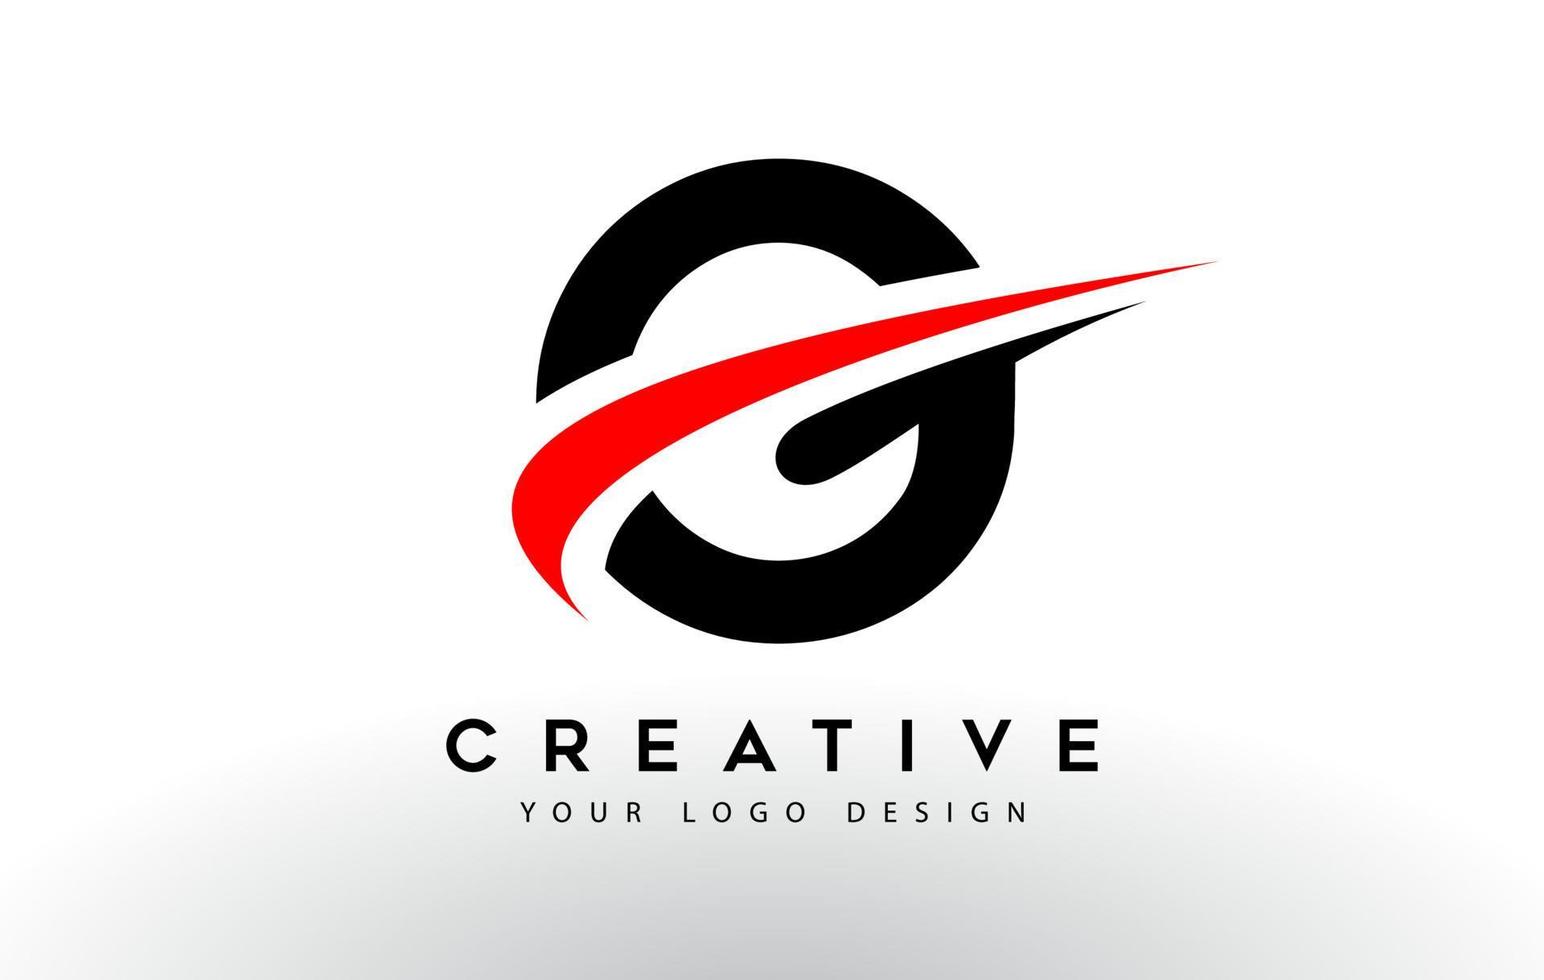 Black And Red Creative G Letter Logo Design with Swoosh Icon Vector. vector